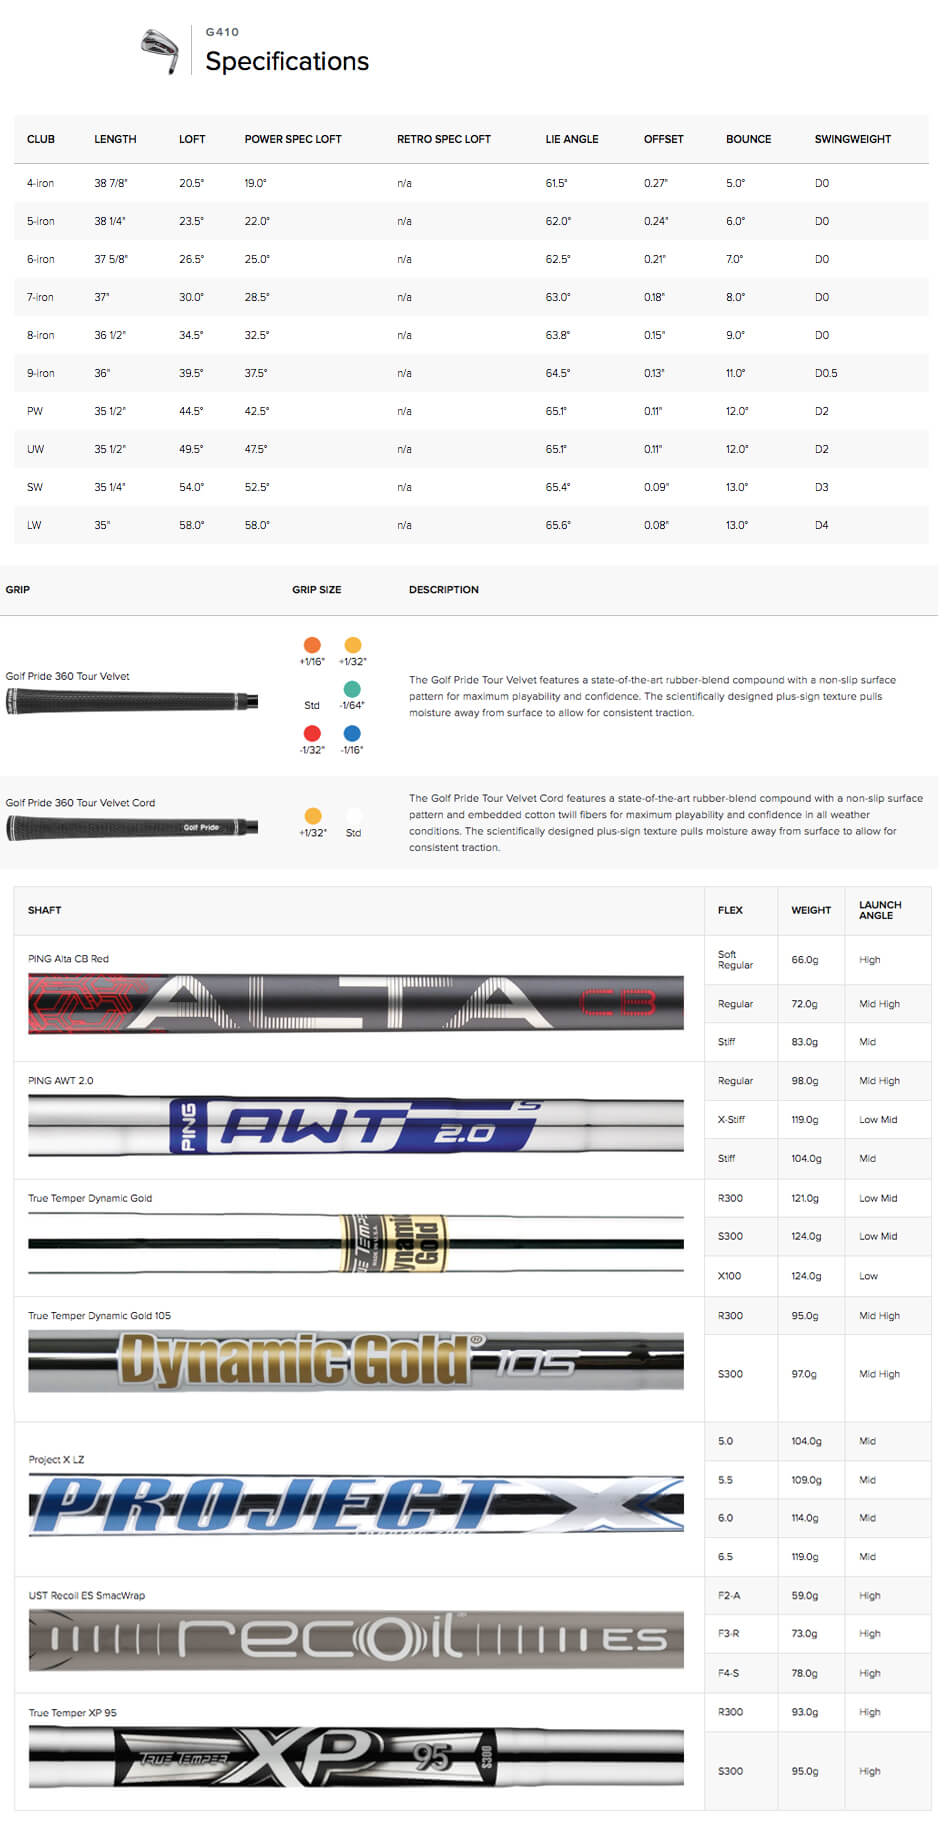 Specification for Ping G410 Irons - Graphite